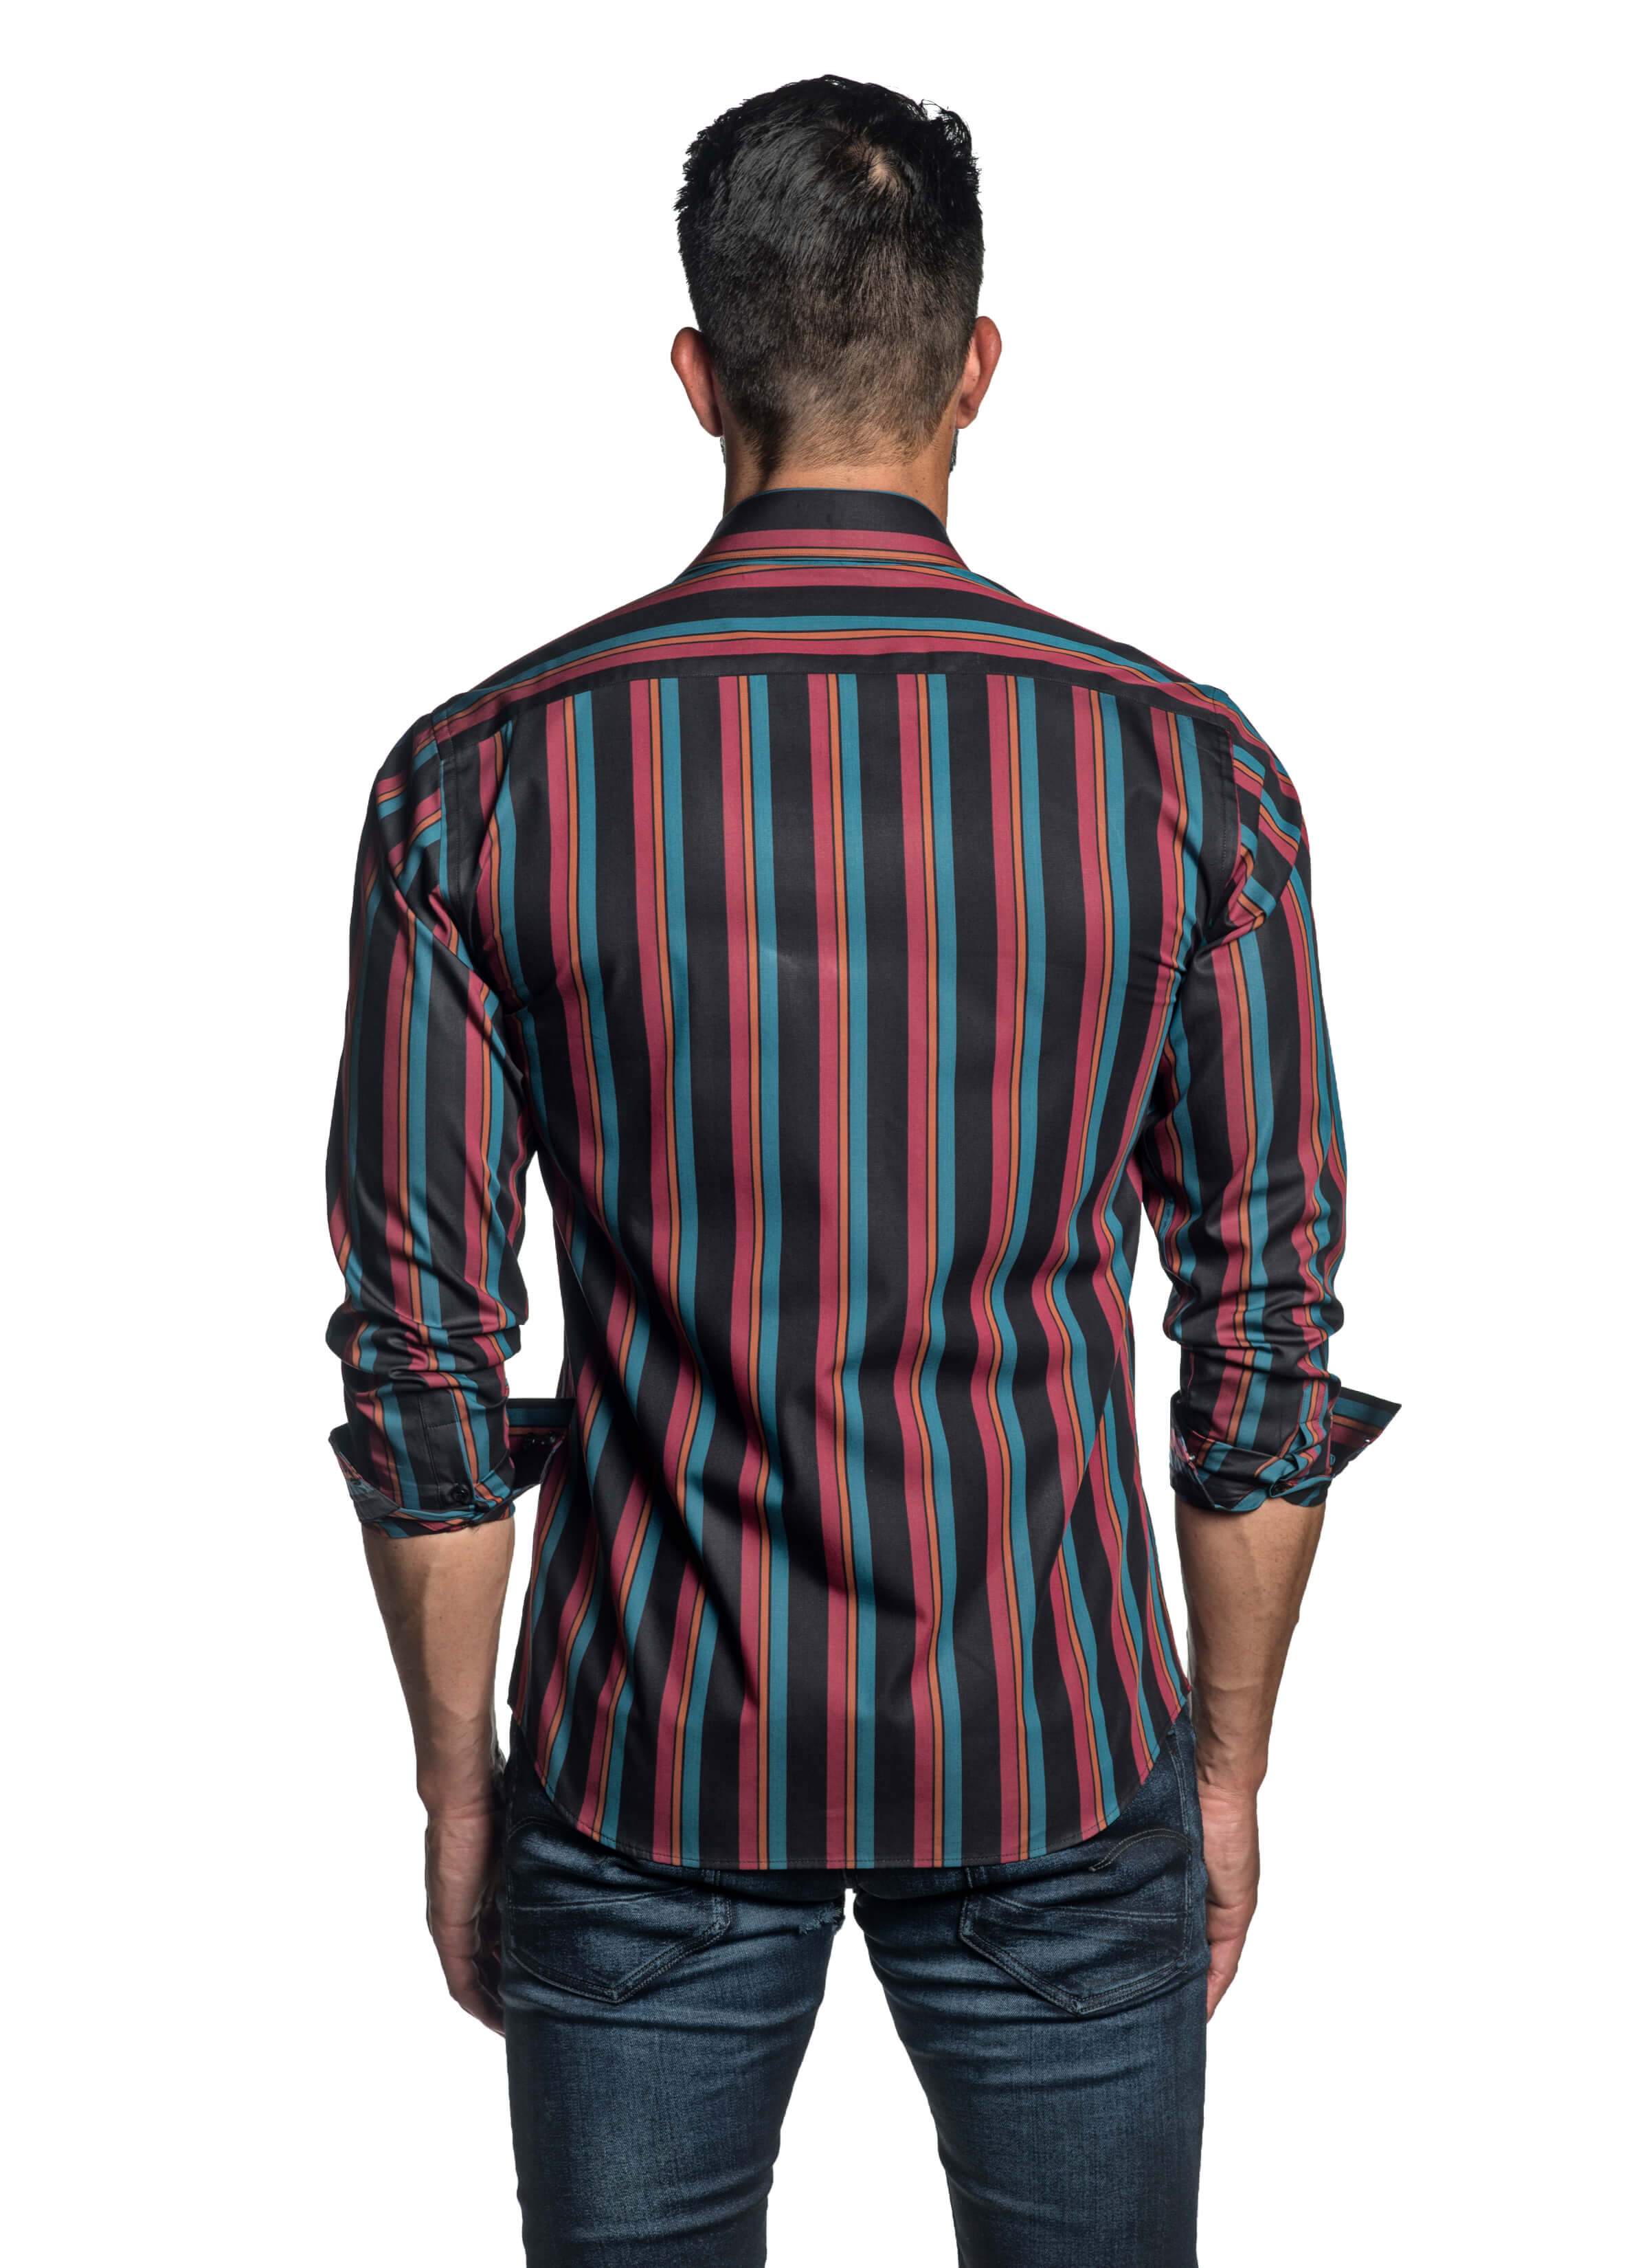 Black and Red Stripe Shirt for Men T-2610